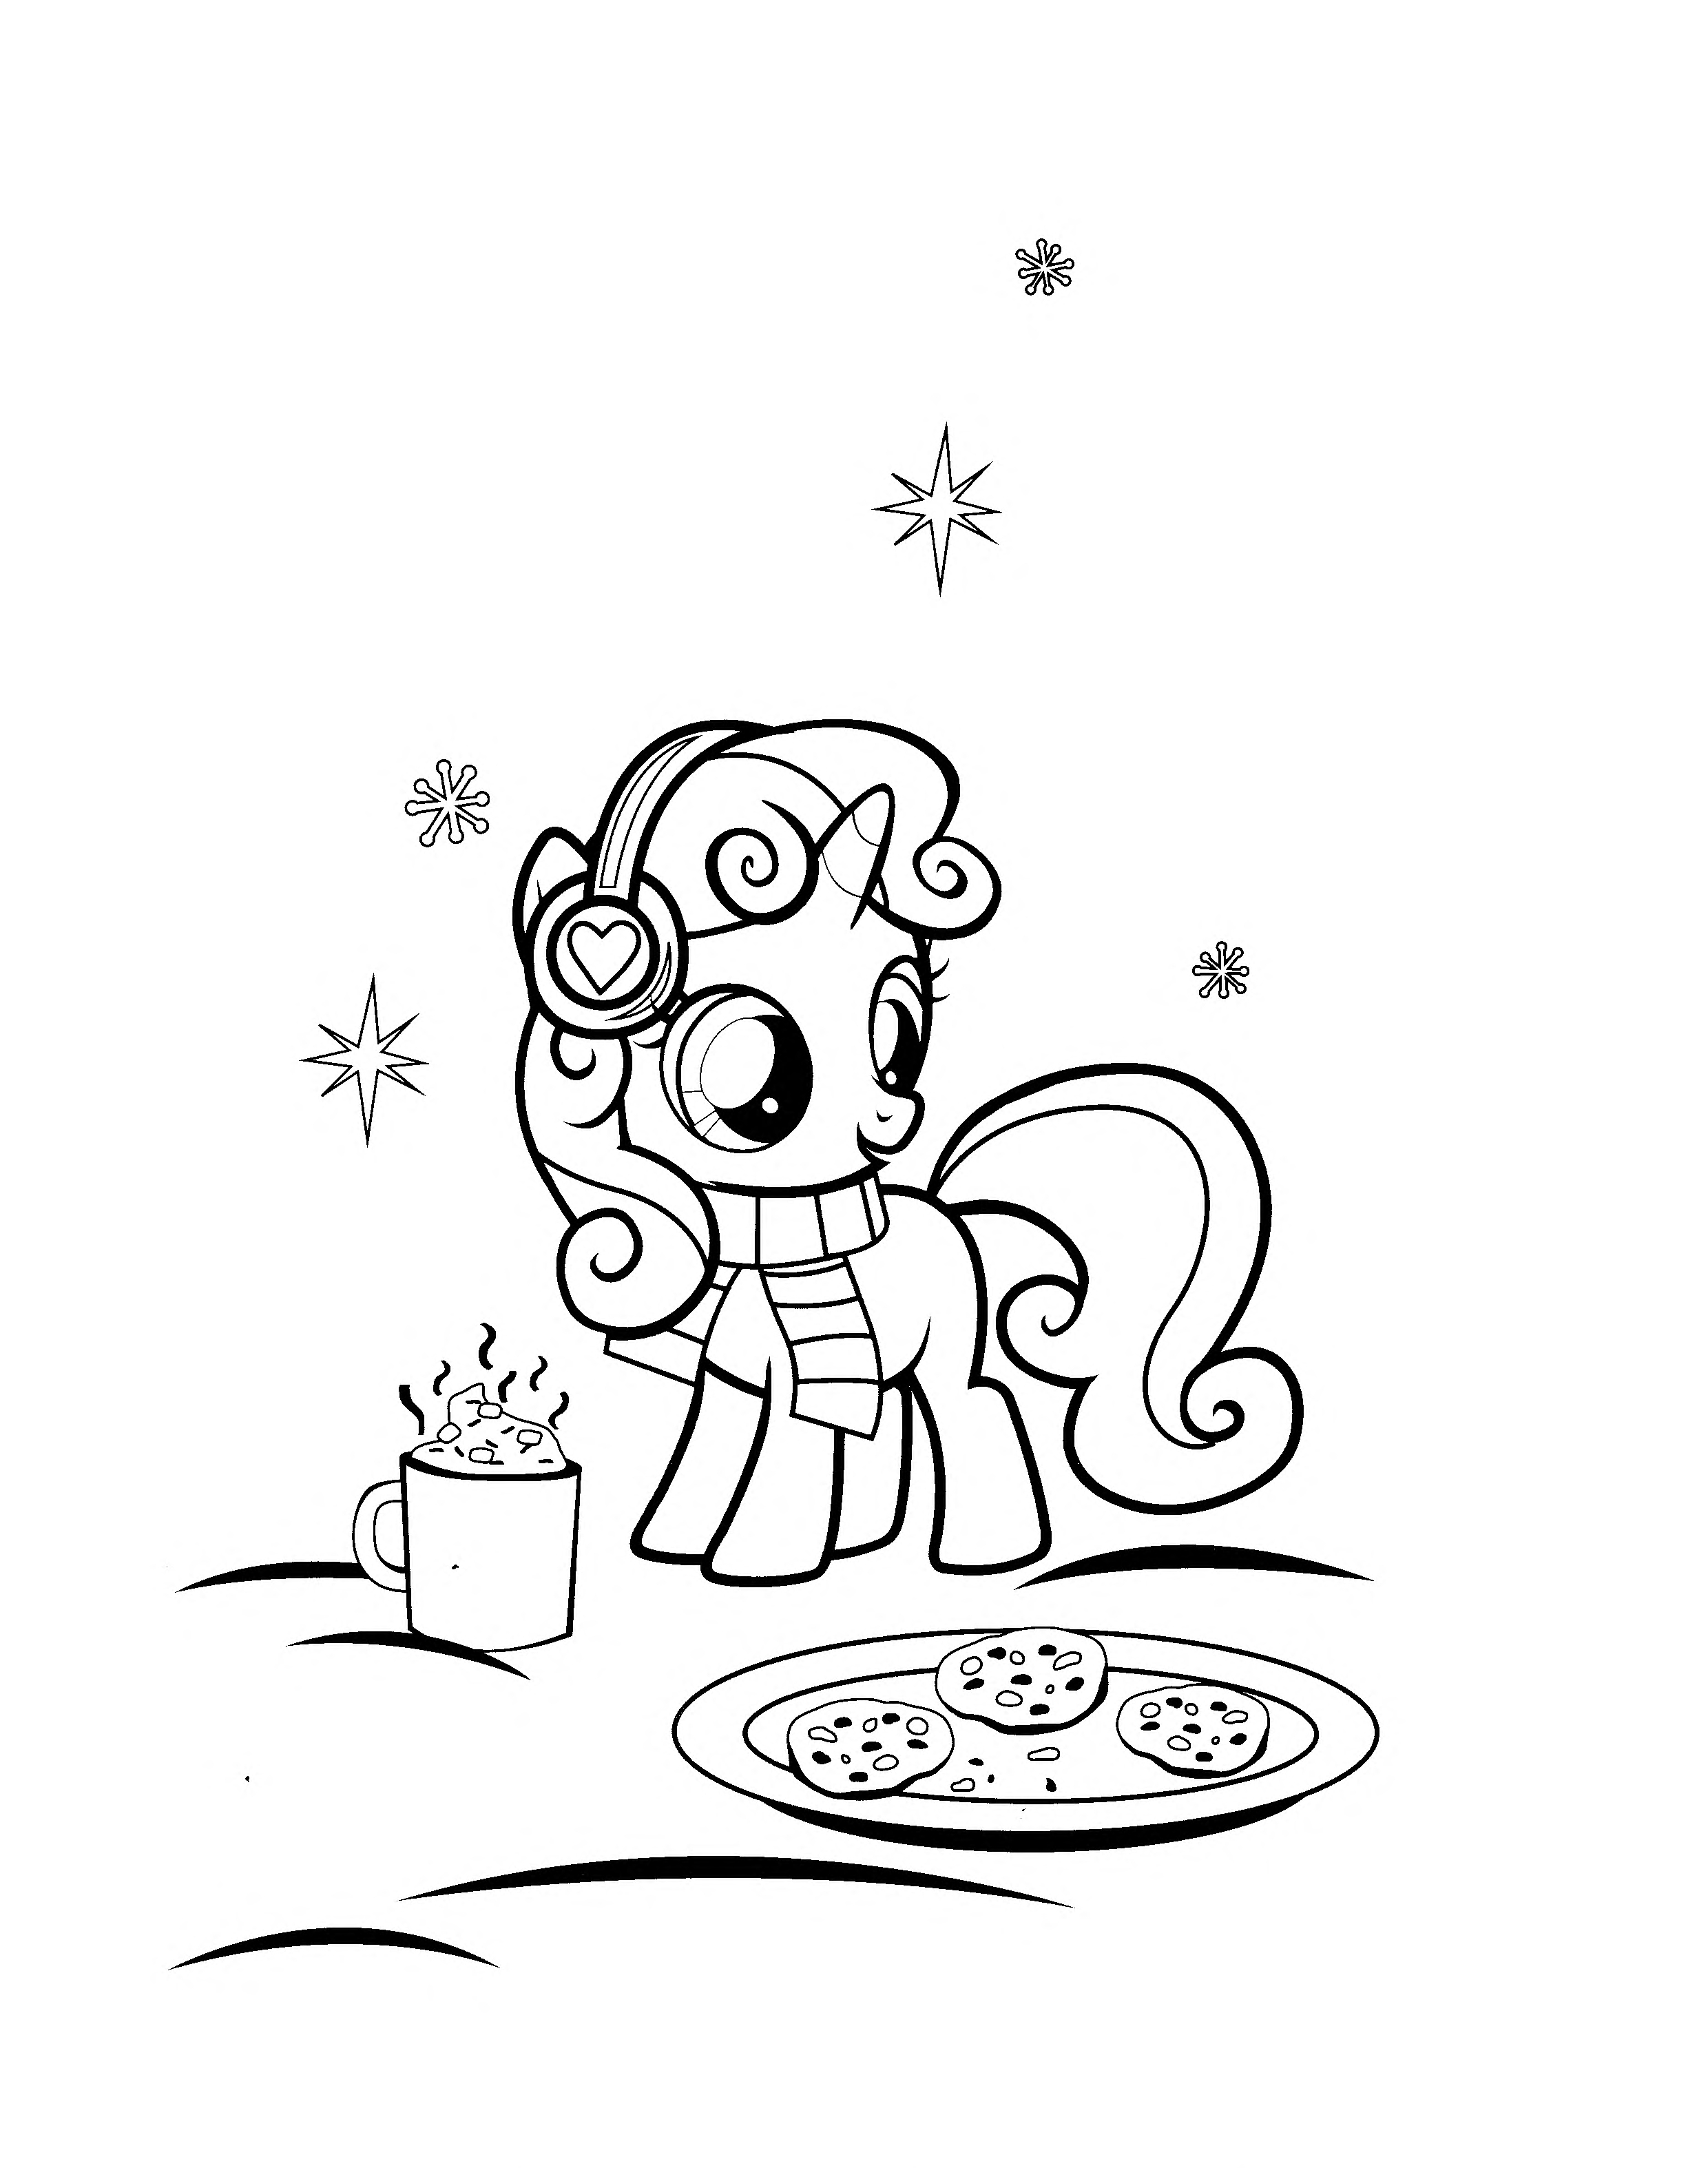 Christmas Toys Coloring Pages Coloring Sheets My Little Pony Christmas Coloring My Little Pony